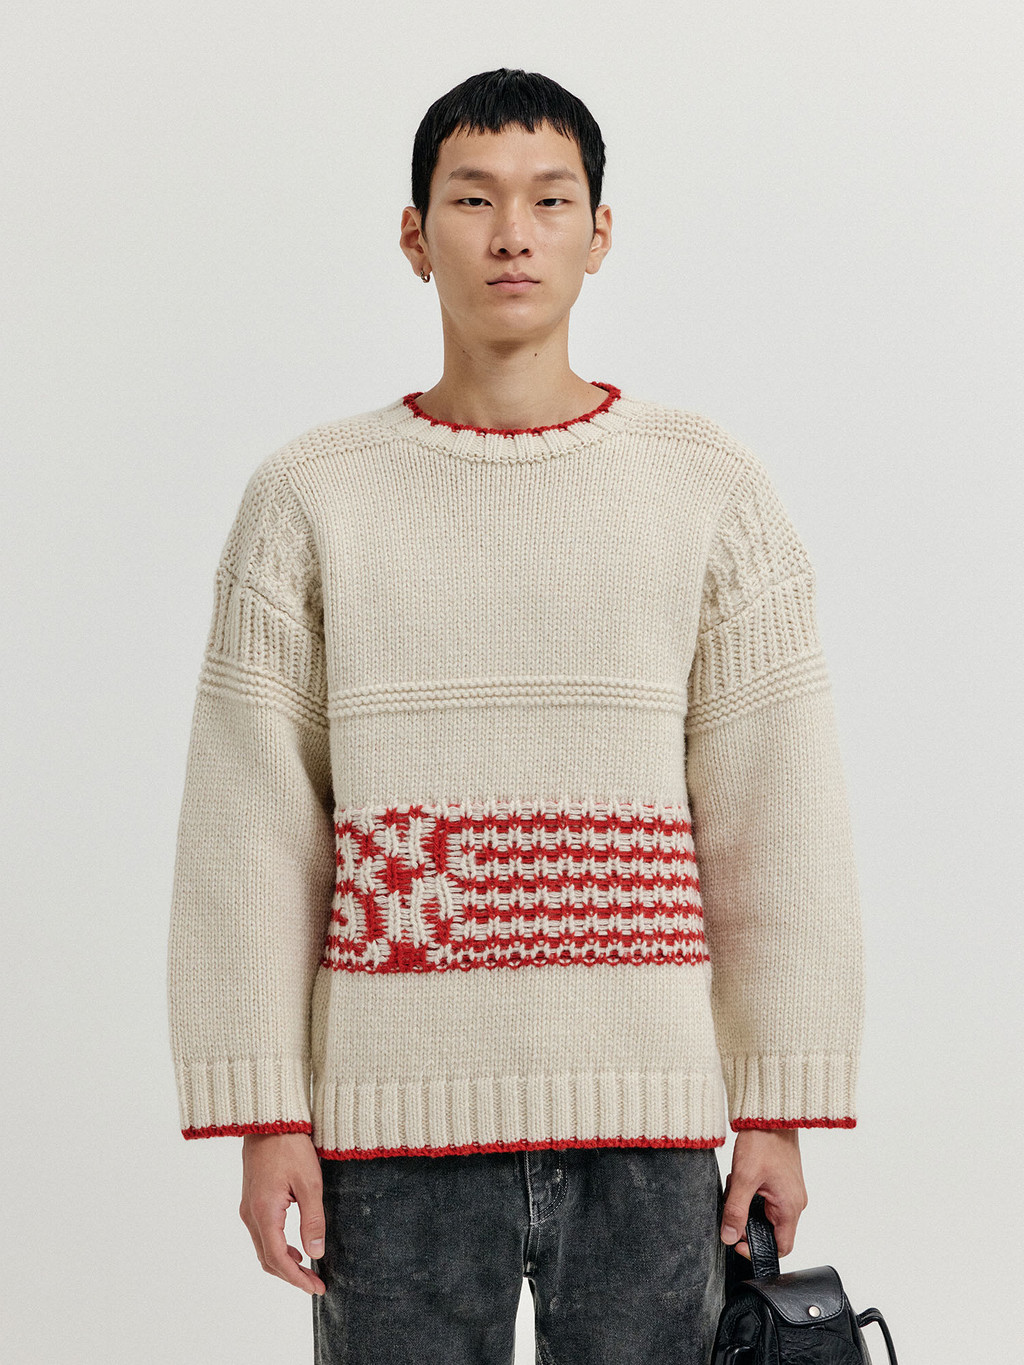 EENK Xanthe Jacquard Knit Pullover by W Concept